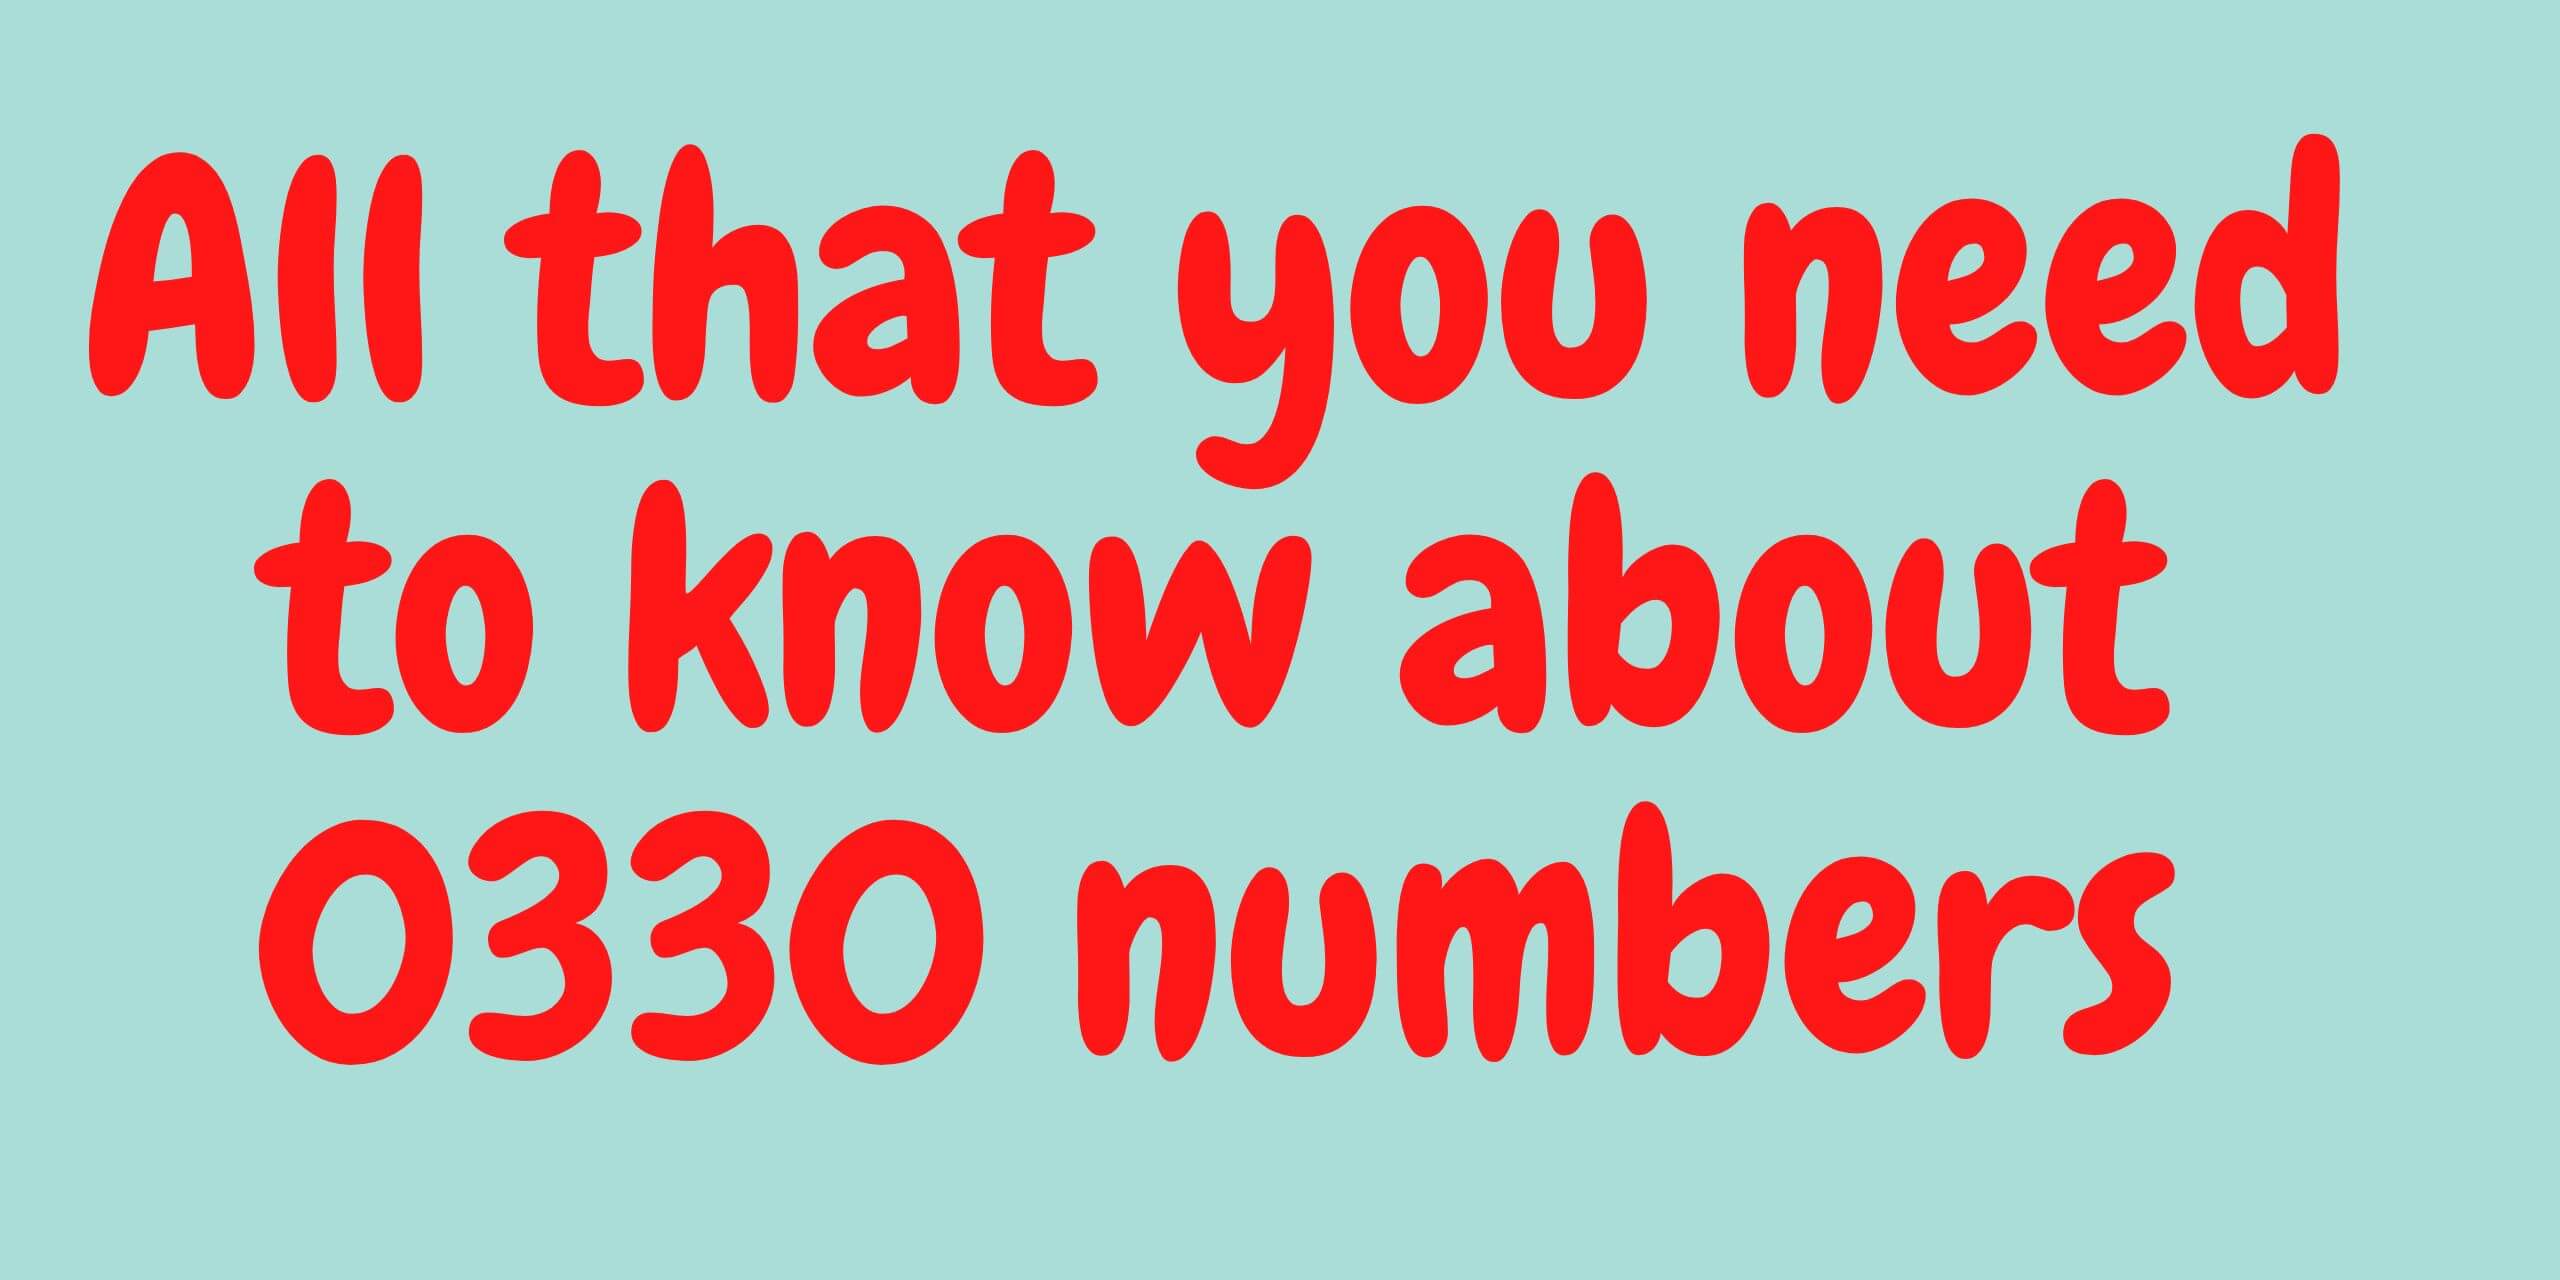 0330 numbers